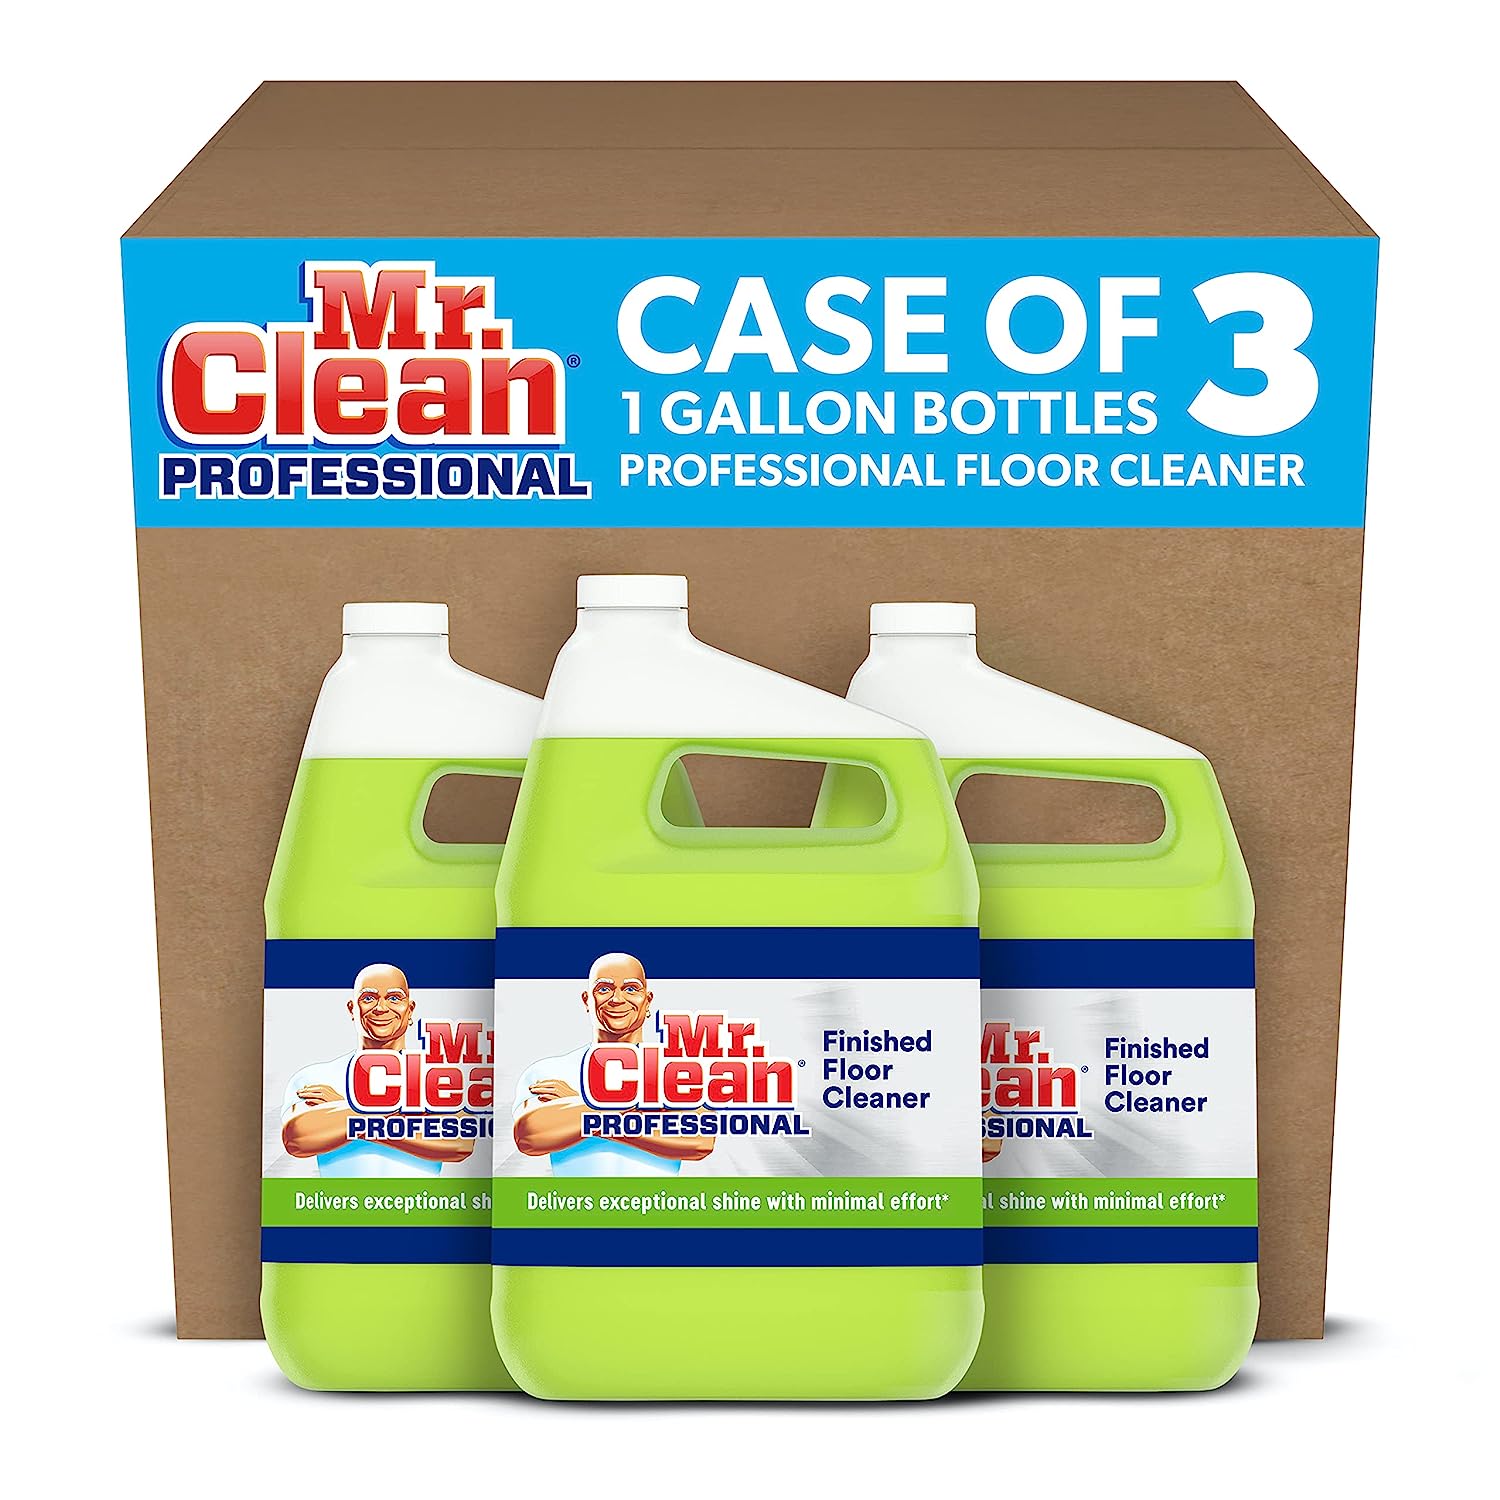 P&G Professional Floor Cleaner from Mr. Clean [...]